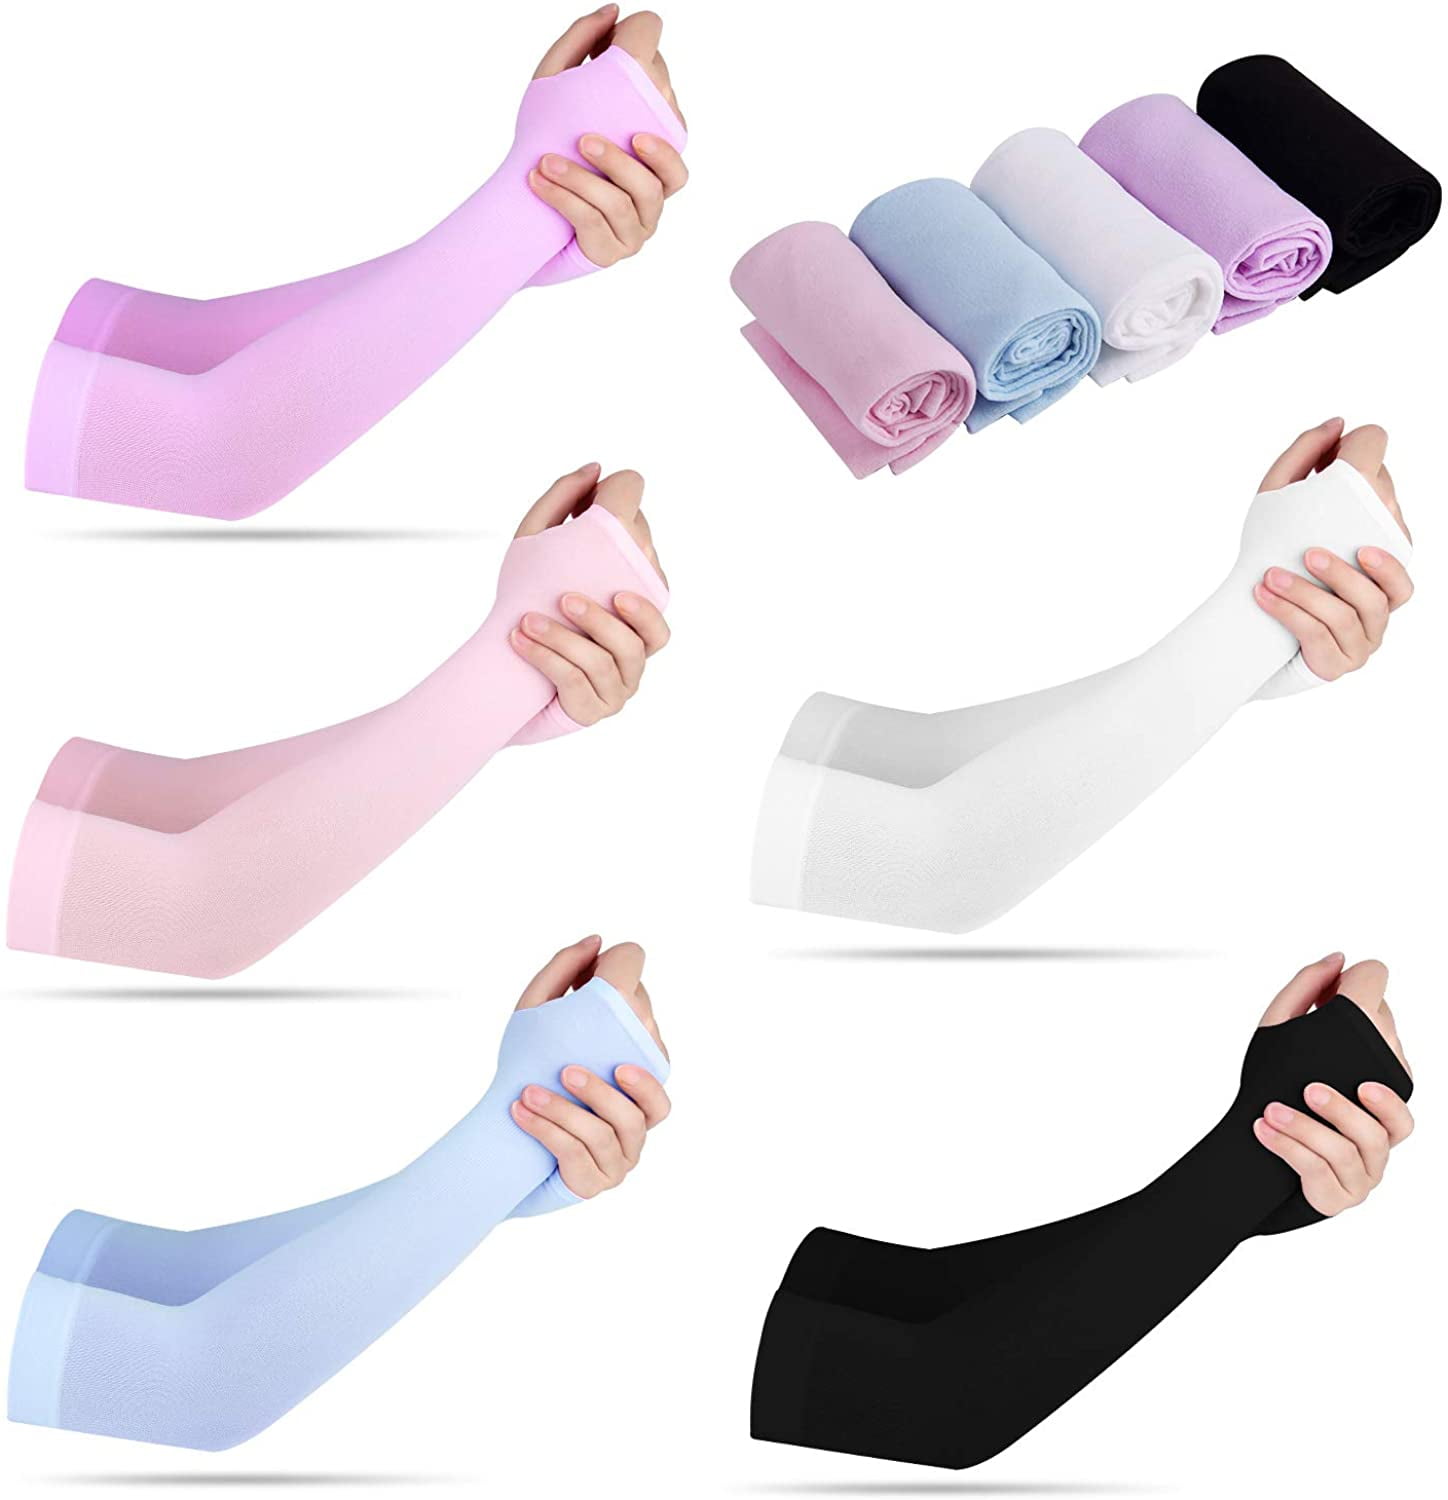 10Pairs Cooling Arm Sleeves Outdoor Sport Basketball UV Sun Protection Arm Cover 